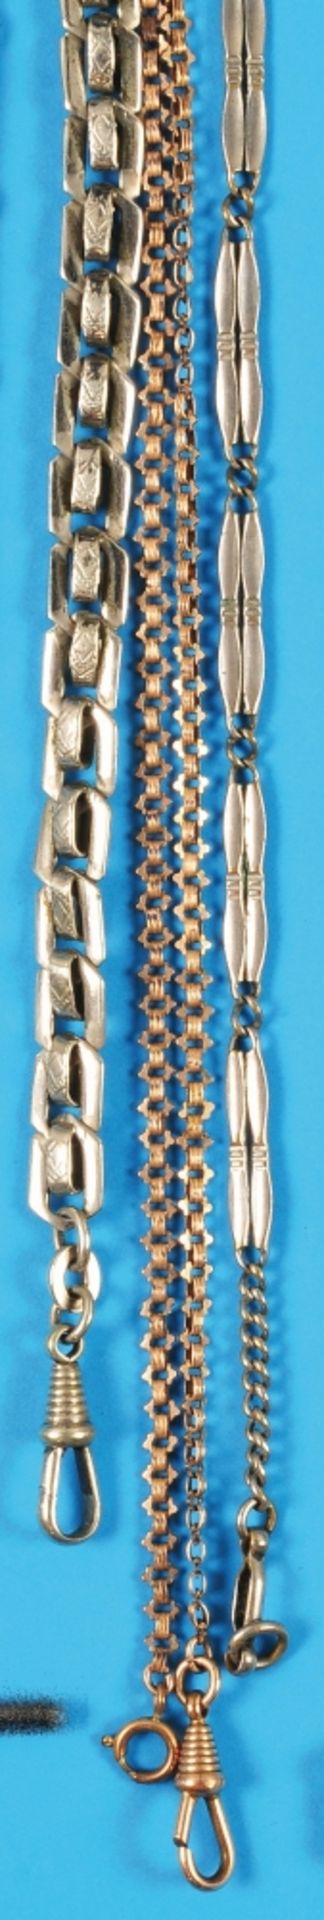 Bundle with 3 pocket watch chains